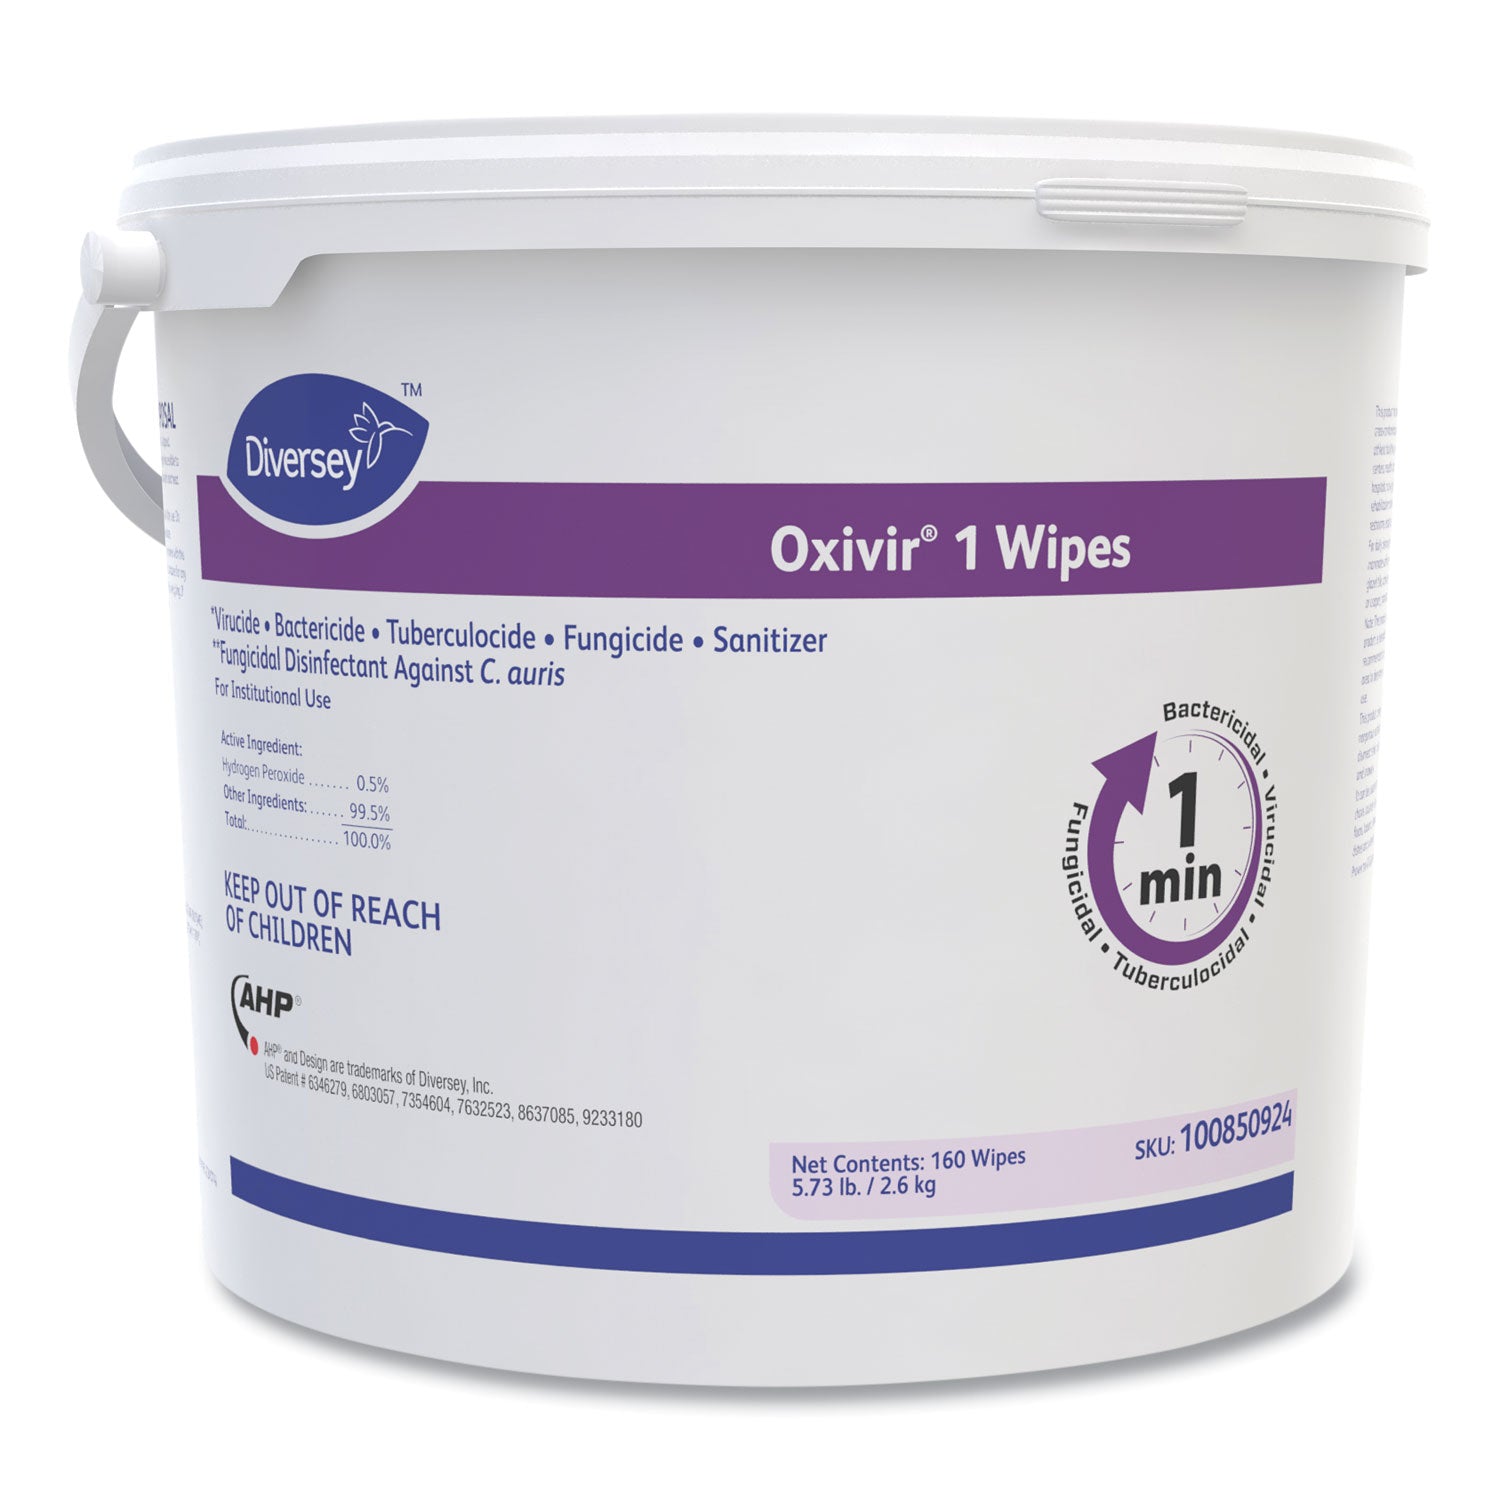 oxivir-1-wipes-1-ply-11-x-12-160-canister-4-canisters-carton_dvo100850924 - 1